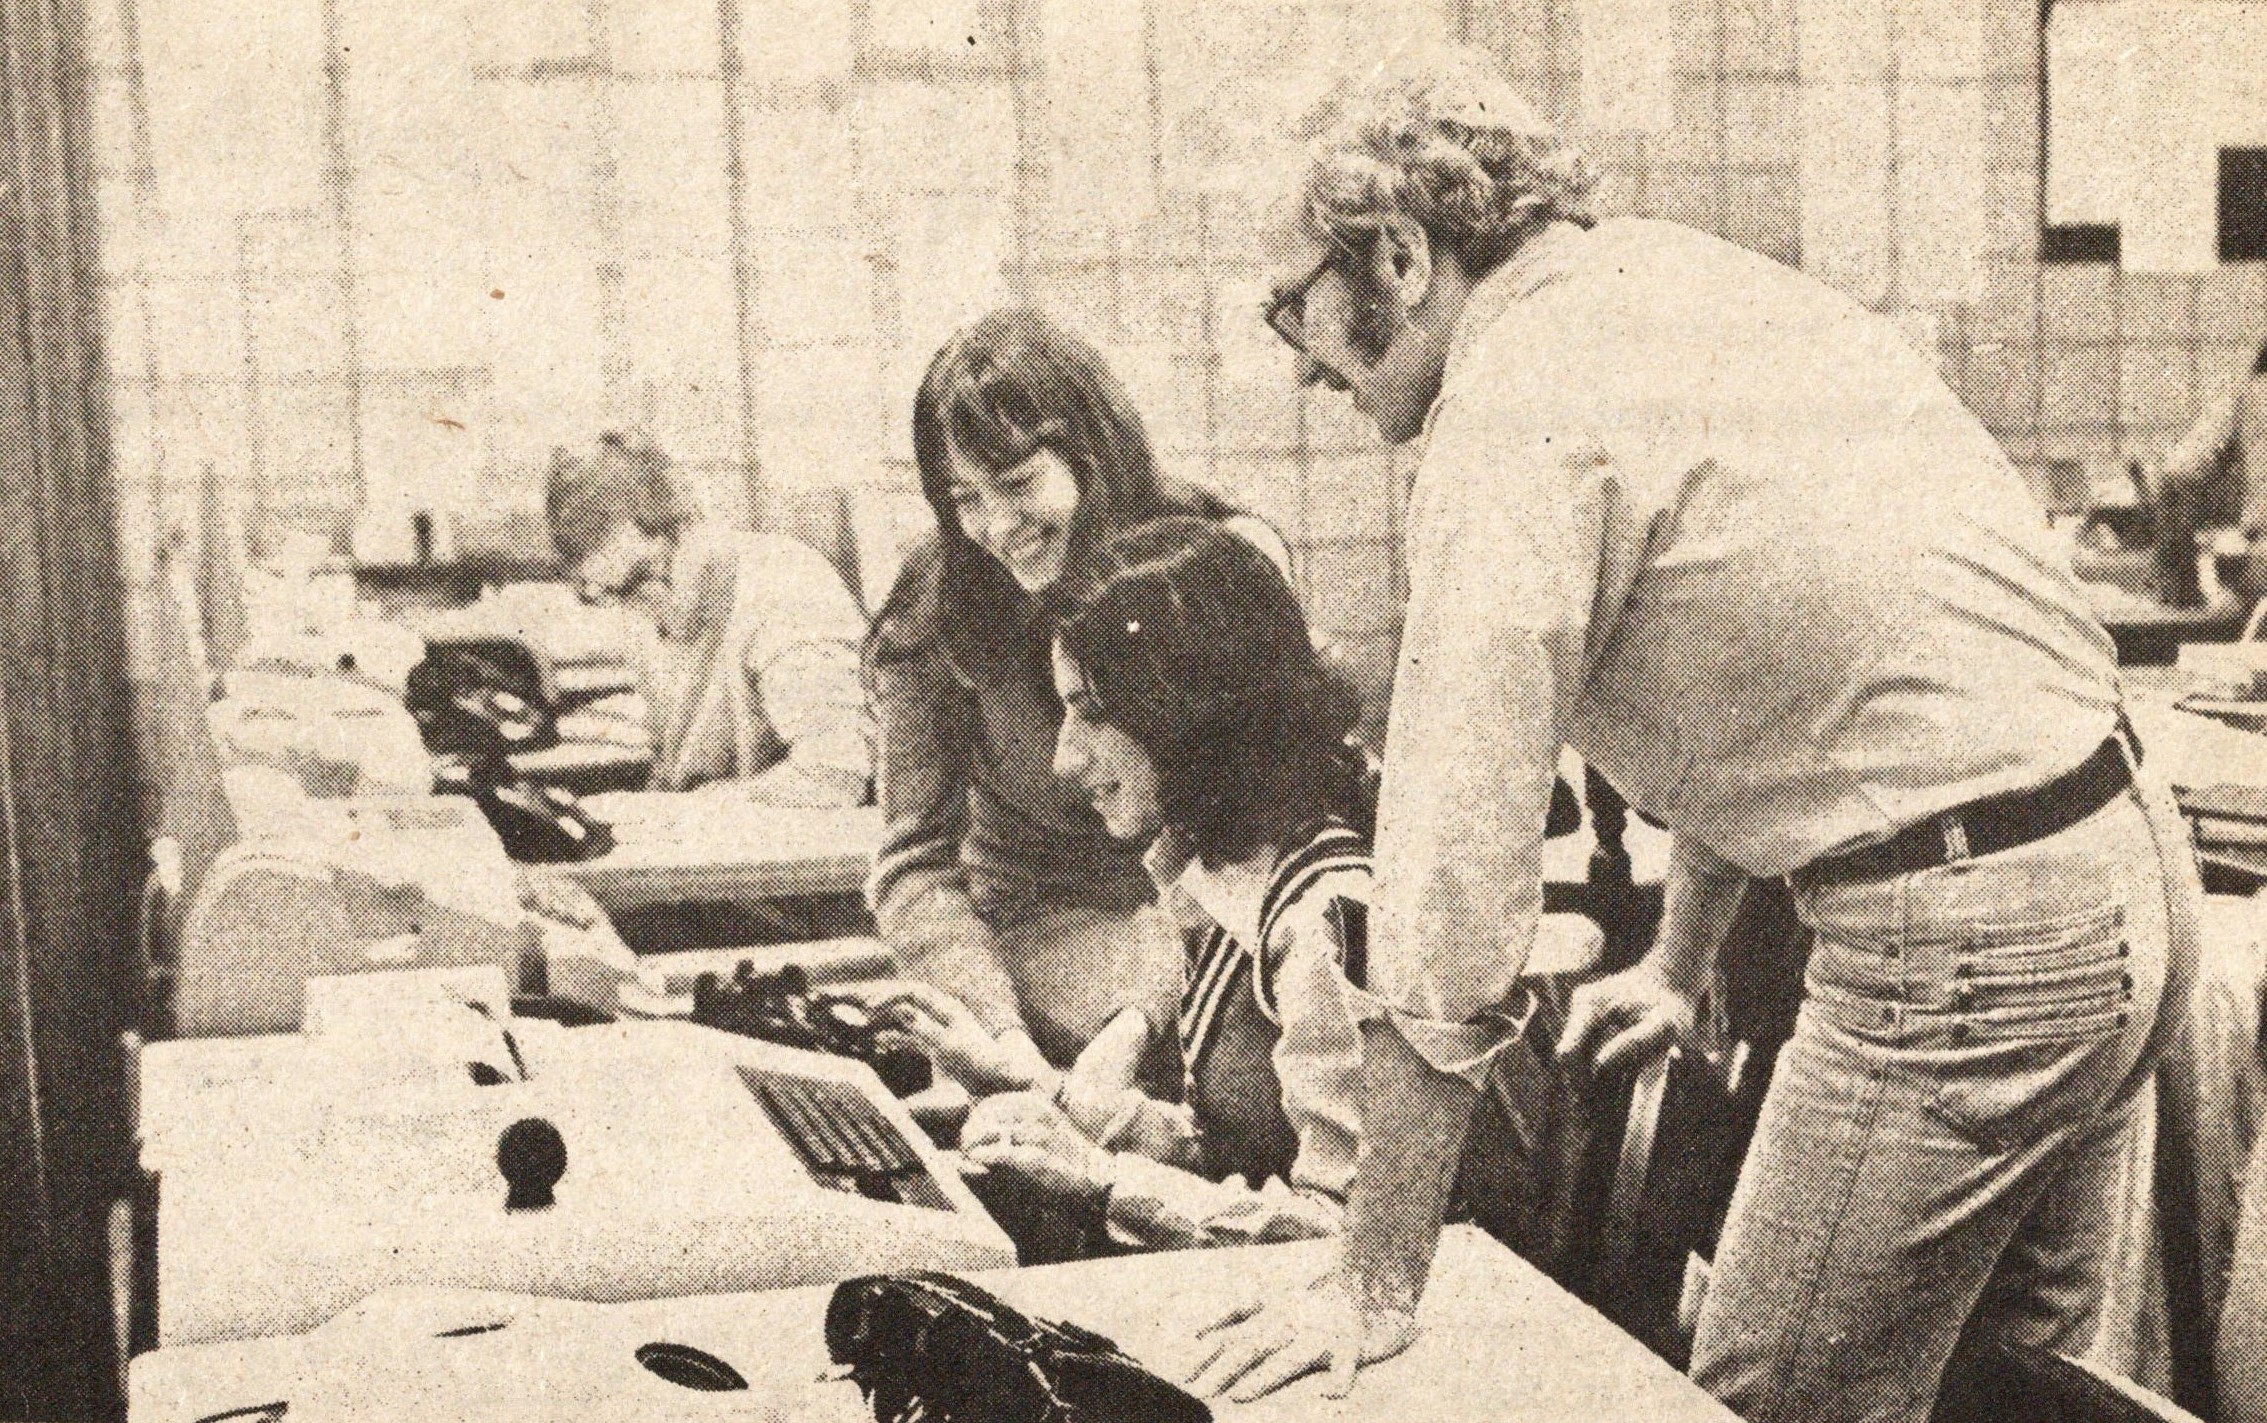 Computer science students working with an instructor in the Uptown computer room, 1979